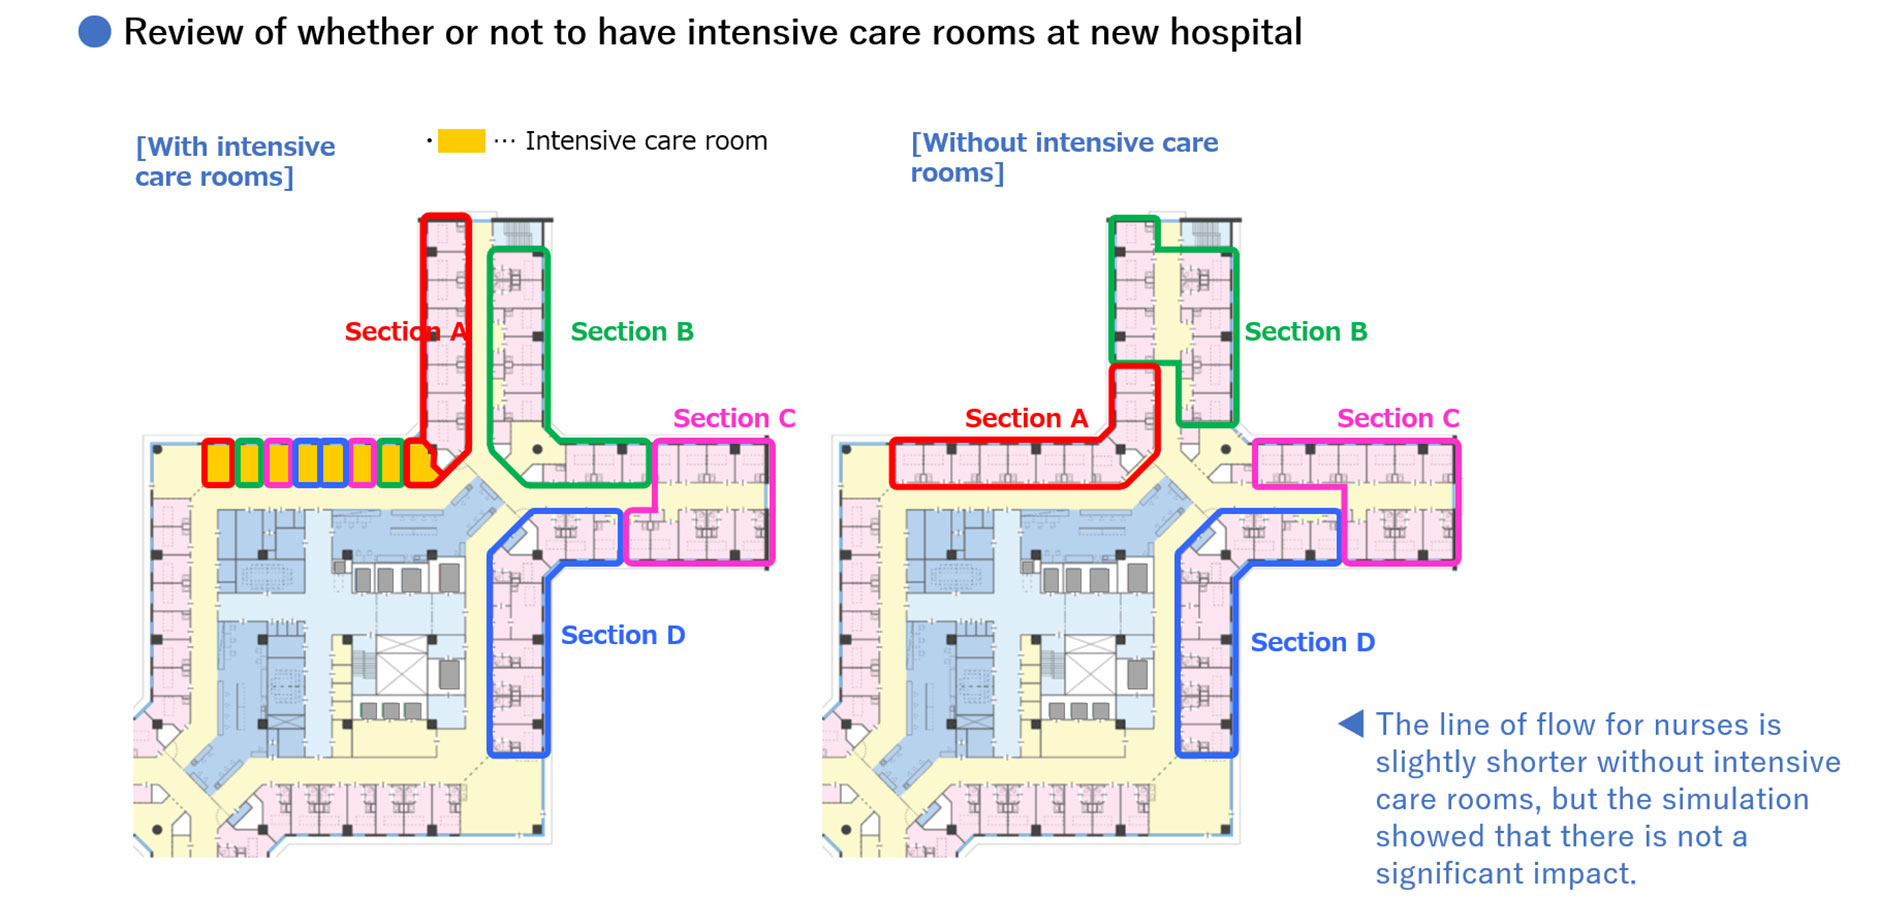 Kawanishi City Medical Center features all private room (“Triple Cross Wards”) with short lines of flow for nurses making it easier for them to keep an eye on their patients.